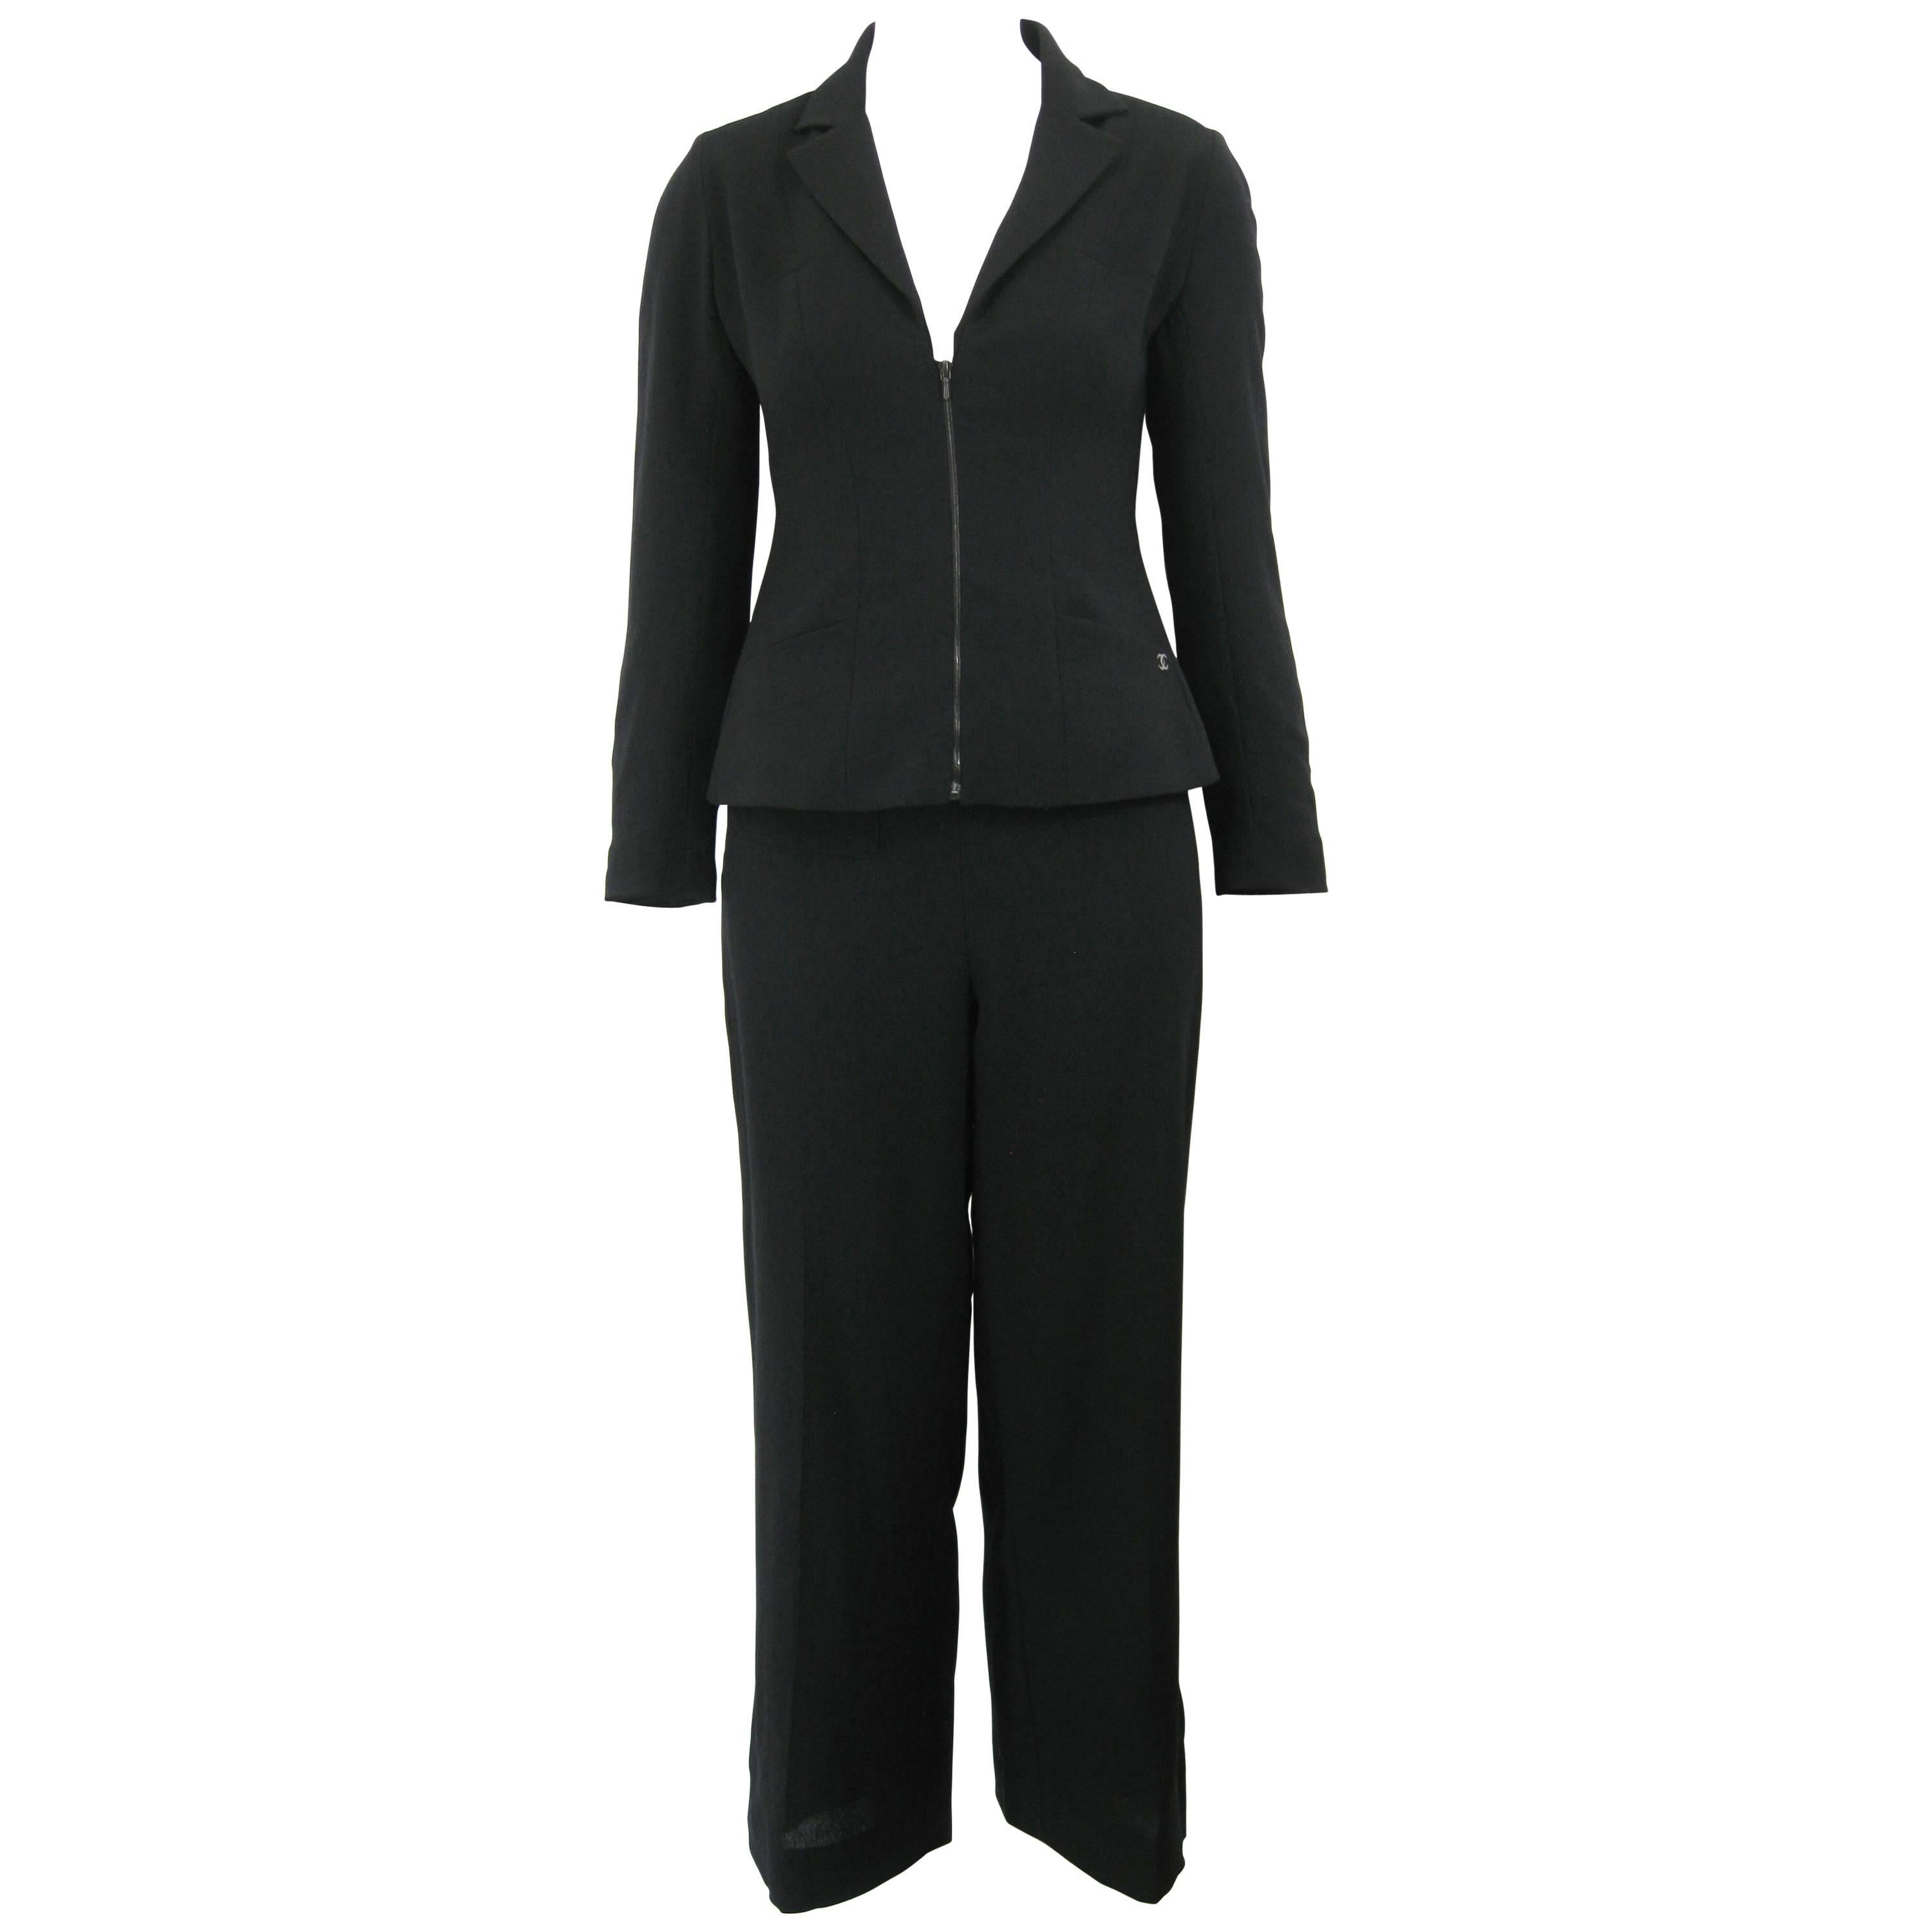 Chanel Classic Lightweight Black Wool Pant Suit